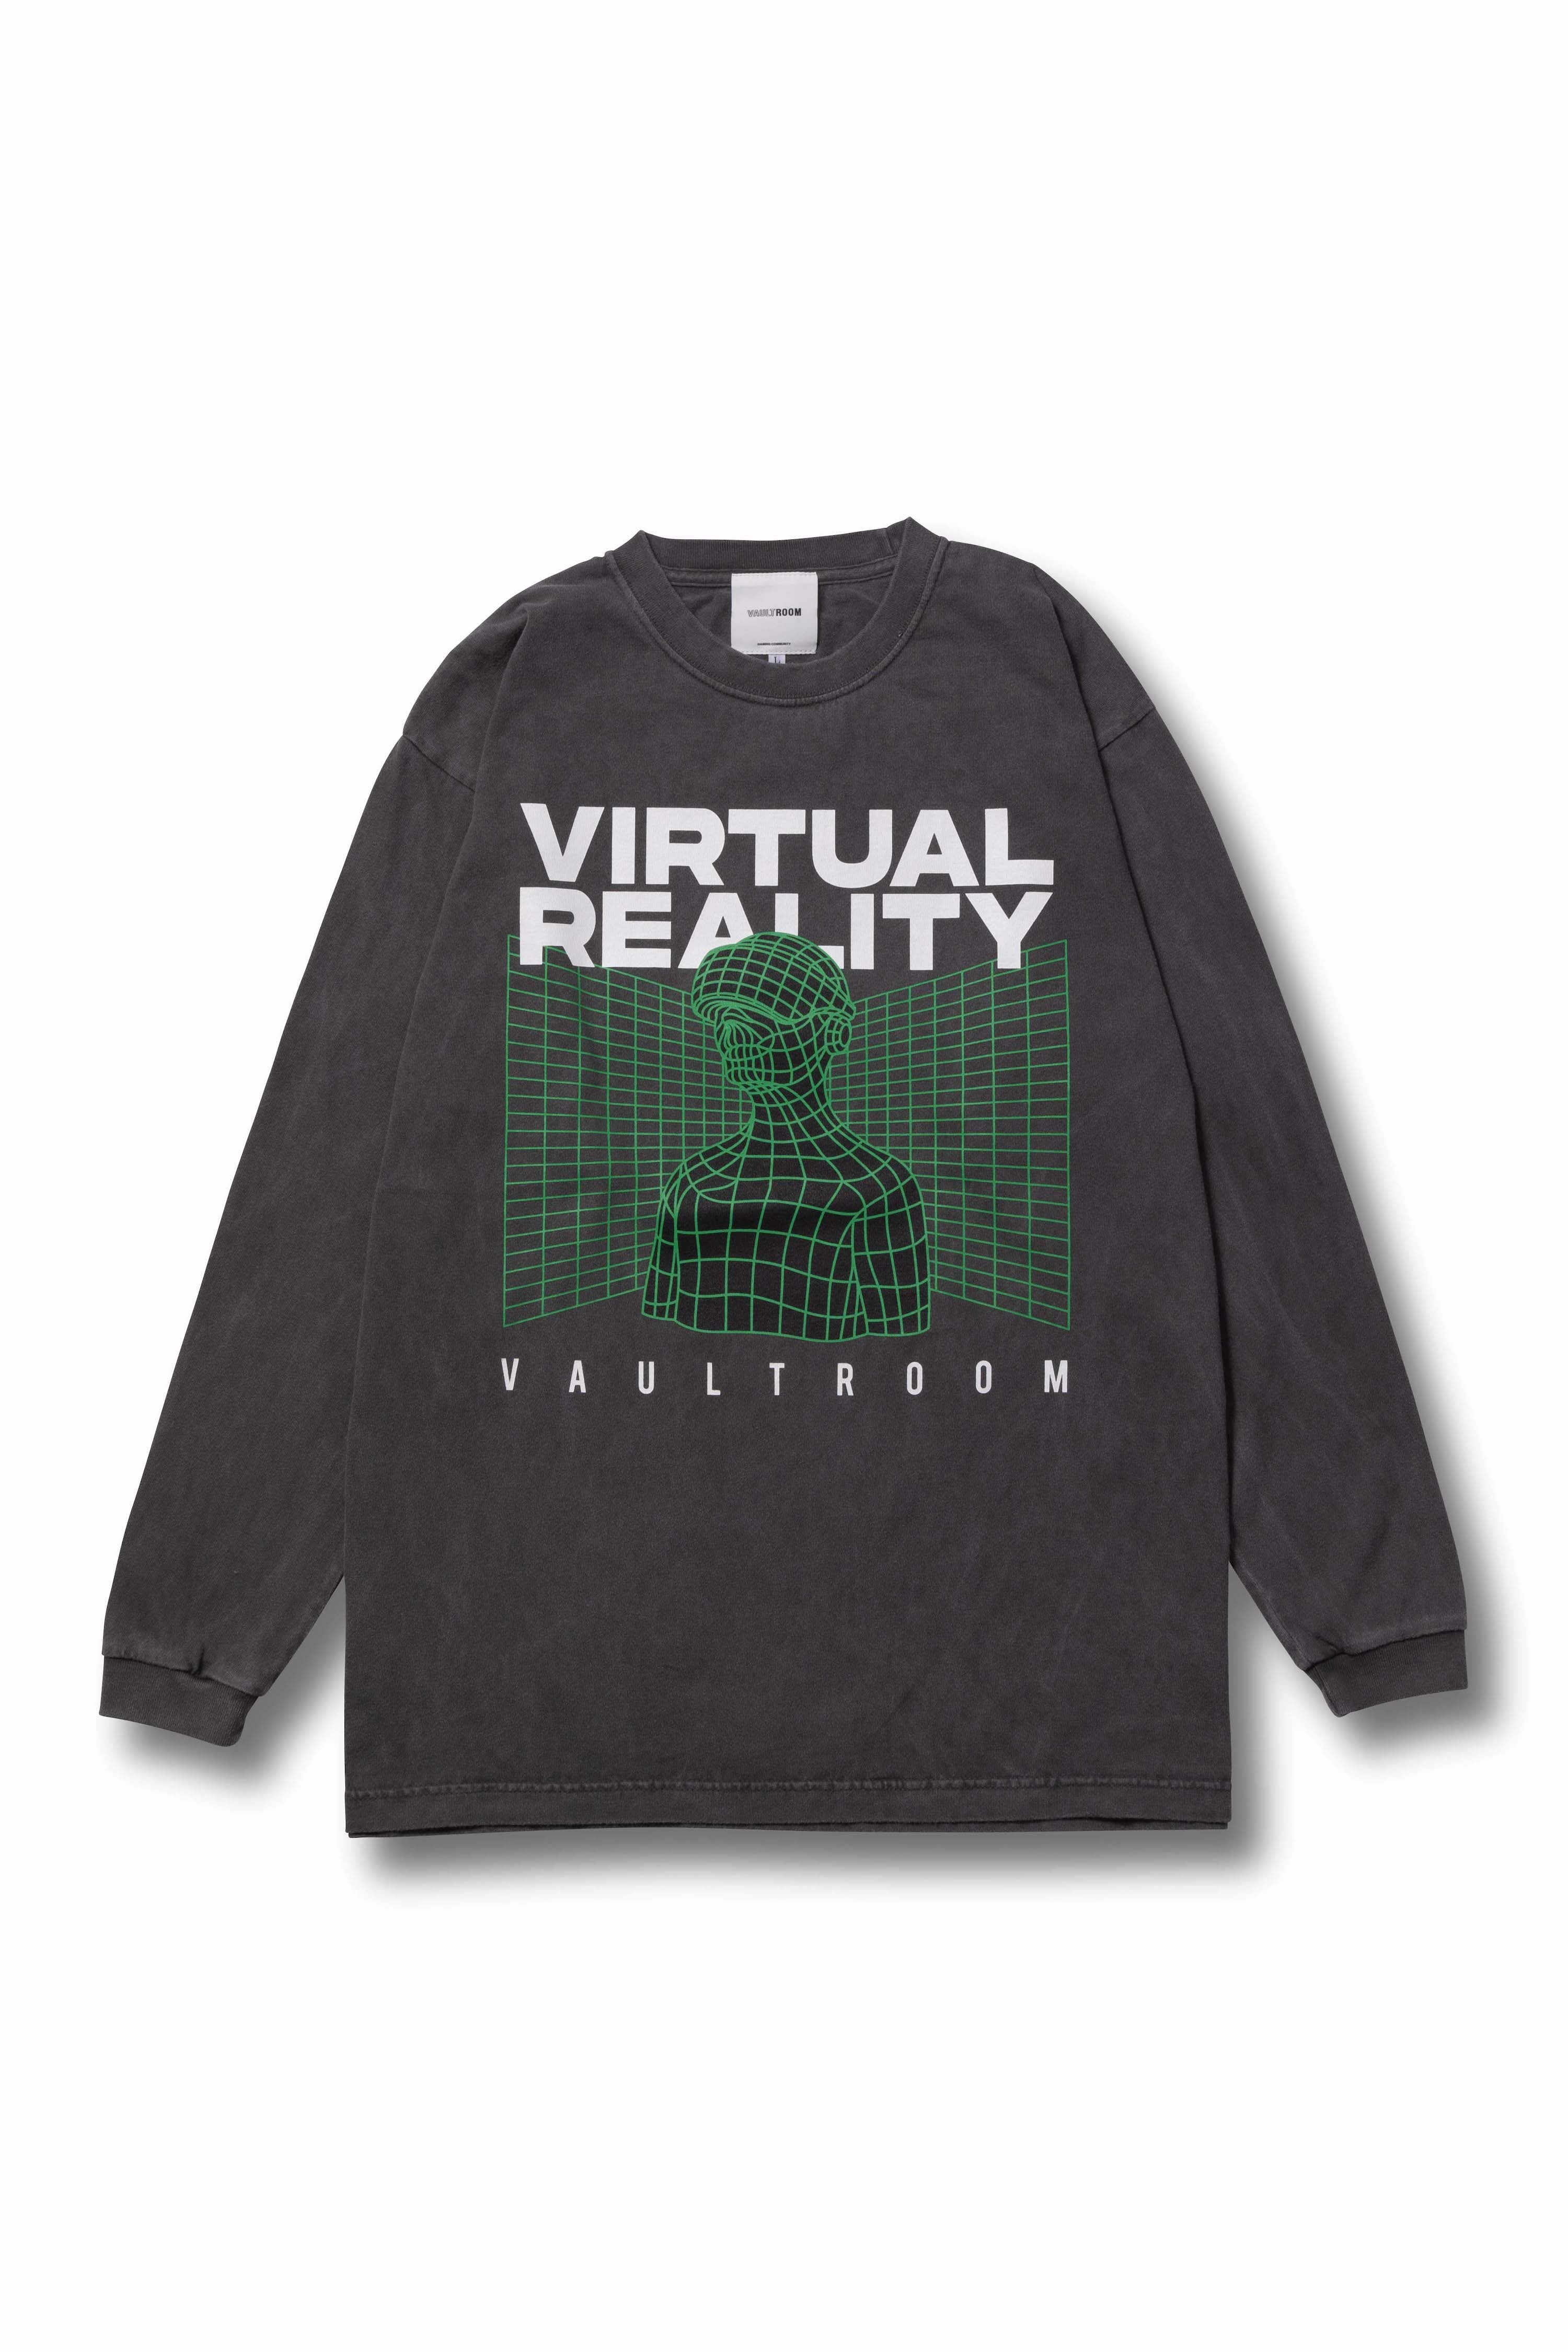 vaultroom HUMANOID L/S TEE / CHARCOAL | camillevieraservices.com